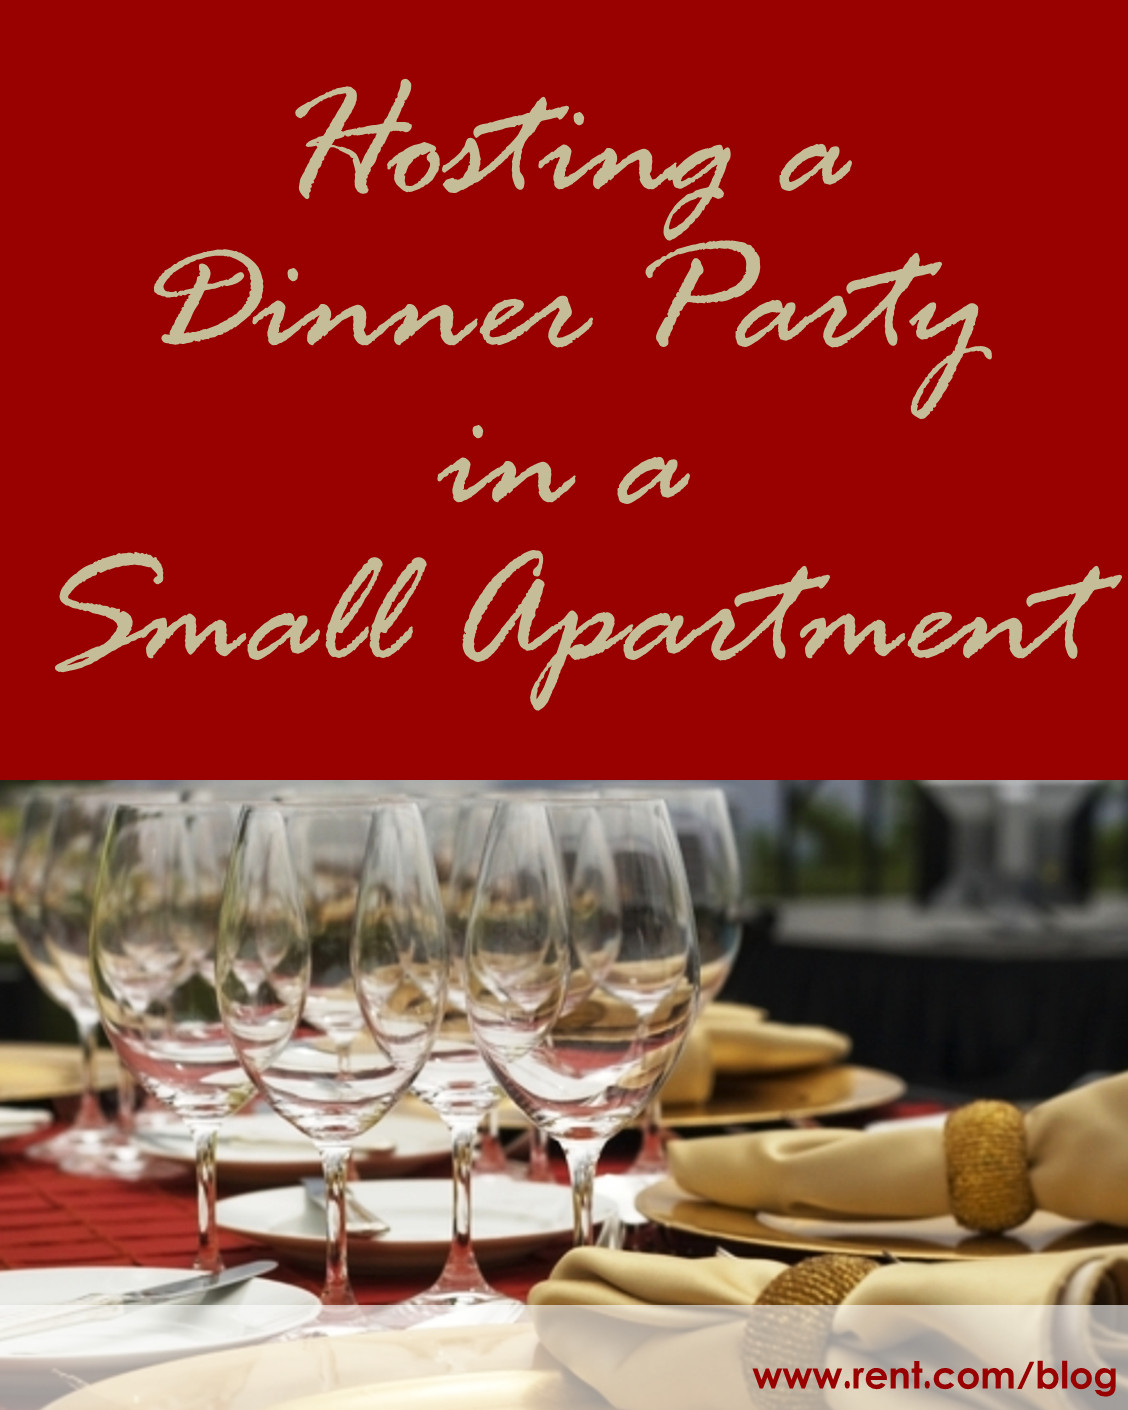 Hosting Christmas Party Ideas
 Hosting a Dinner Party in a Small Apartment